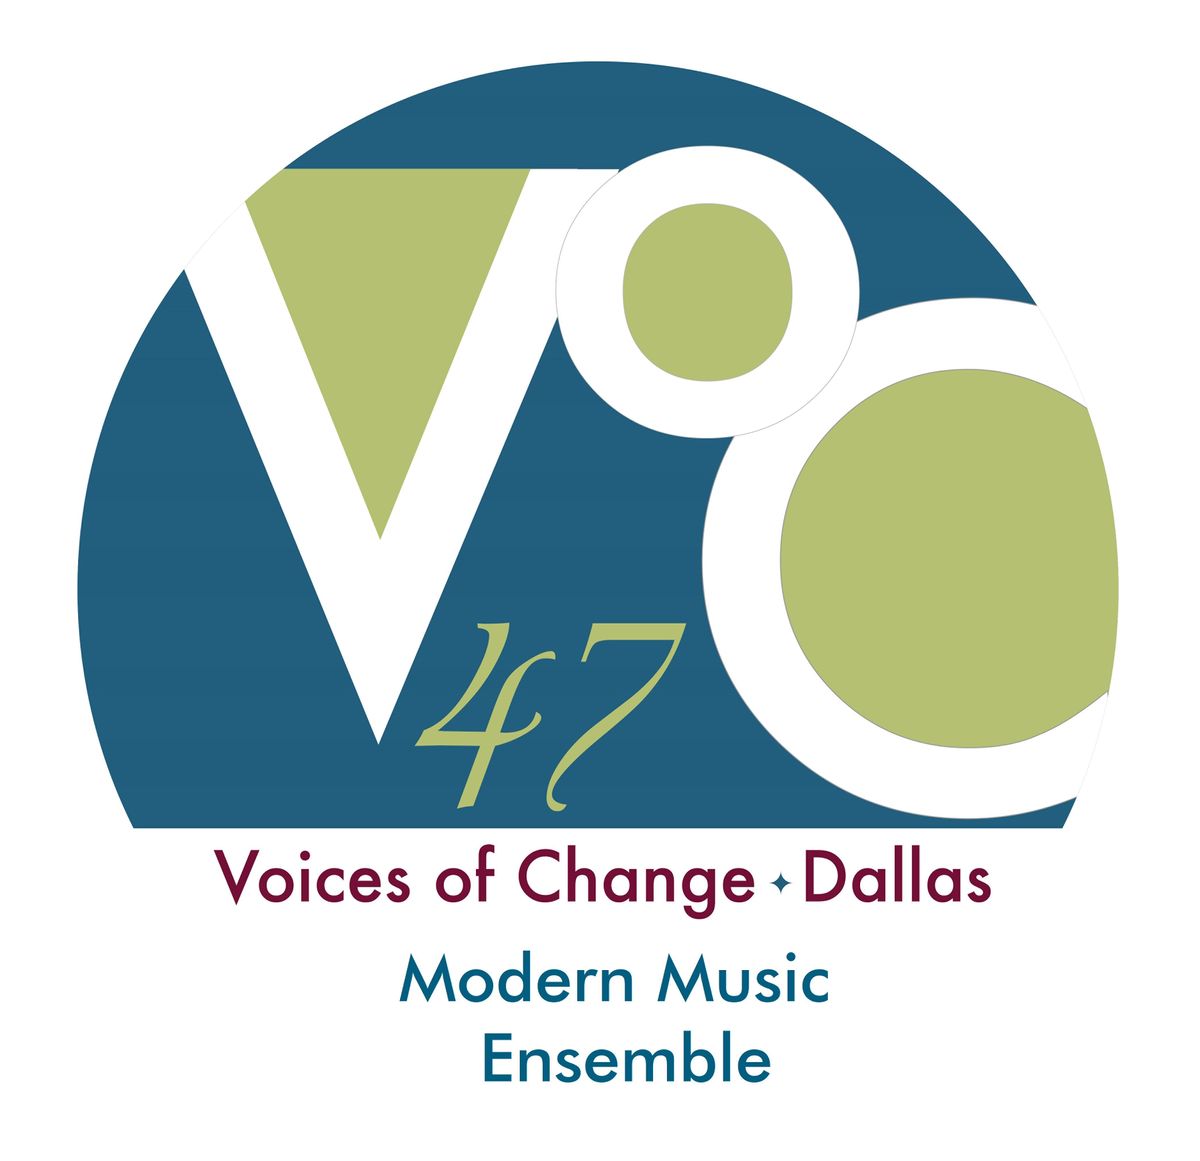 Voices of Change - Season 47 - Concert 3 - Catfish, Folksongs & R2Duo